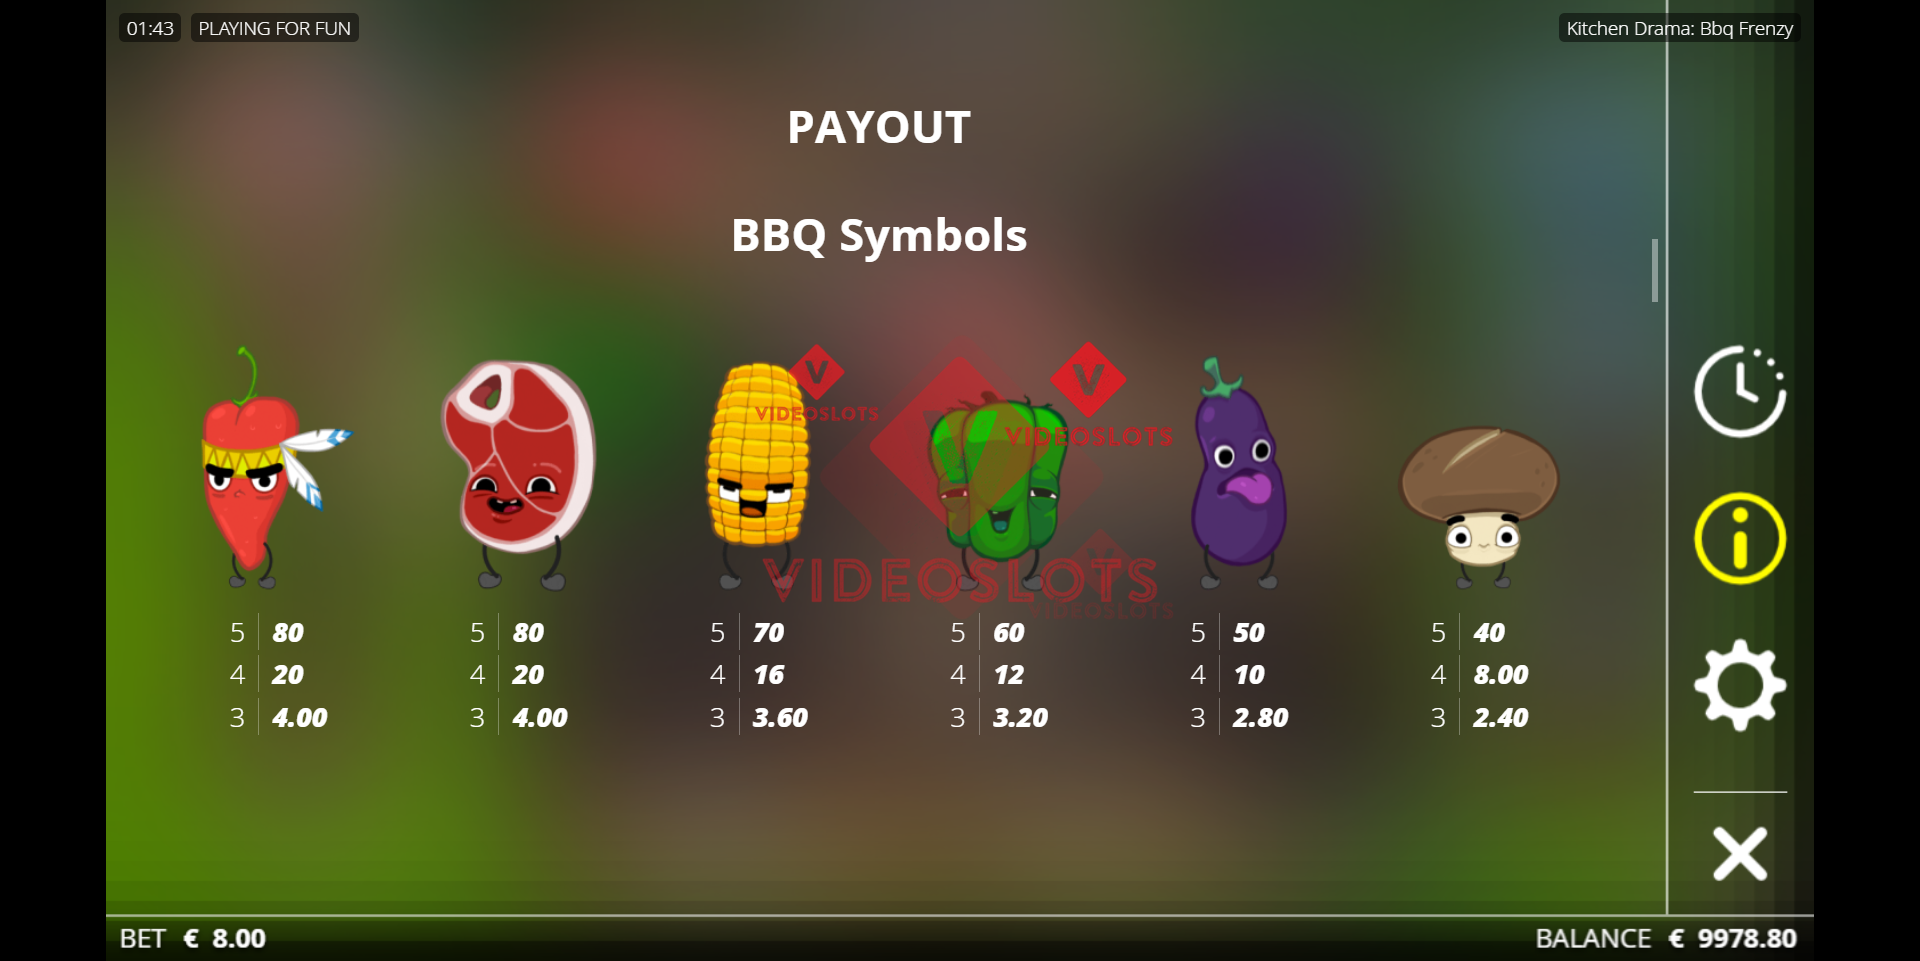 Pay Table for Kitchen Drama BBQ Frenzy slot from NoLimit City